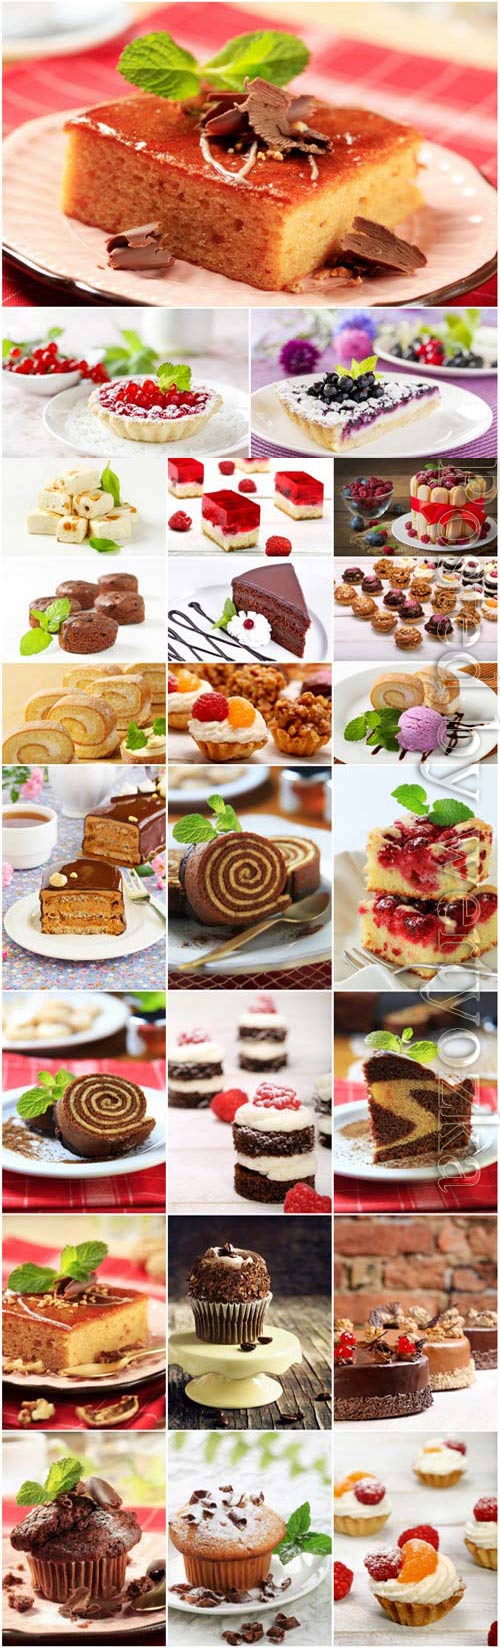 Desserts, muffins and cakes with berries stock photo